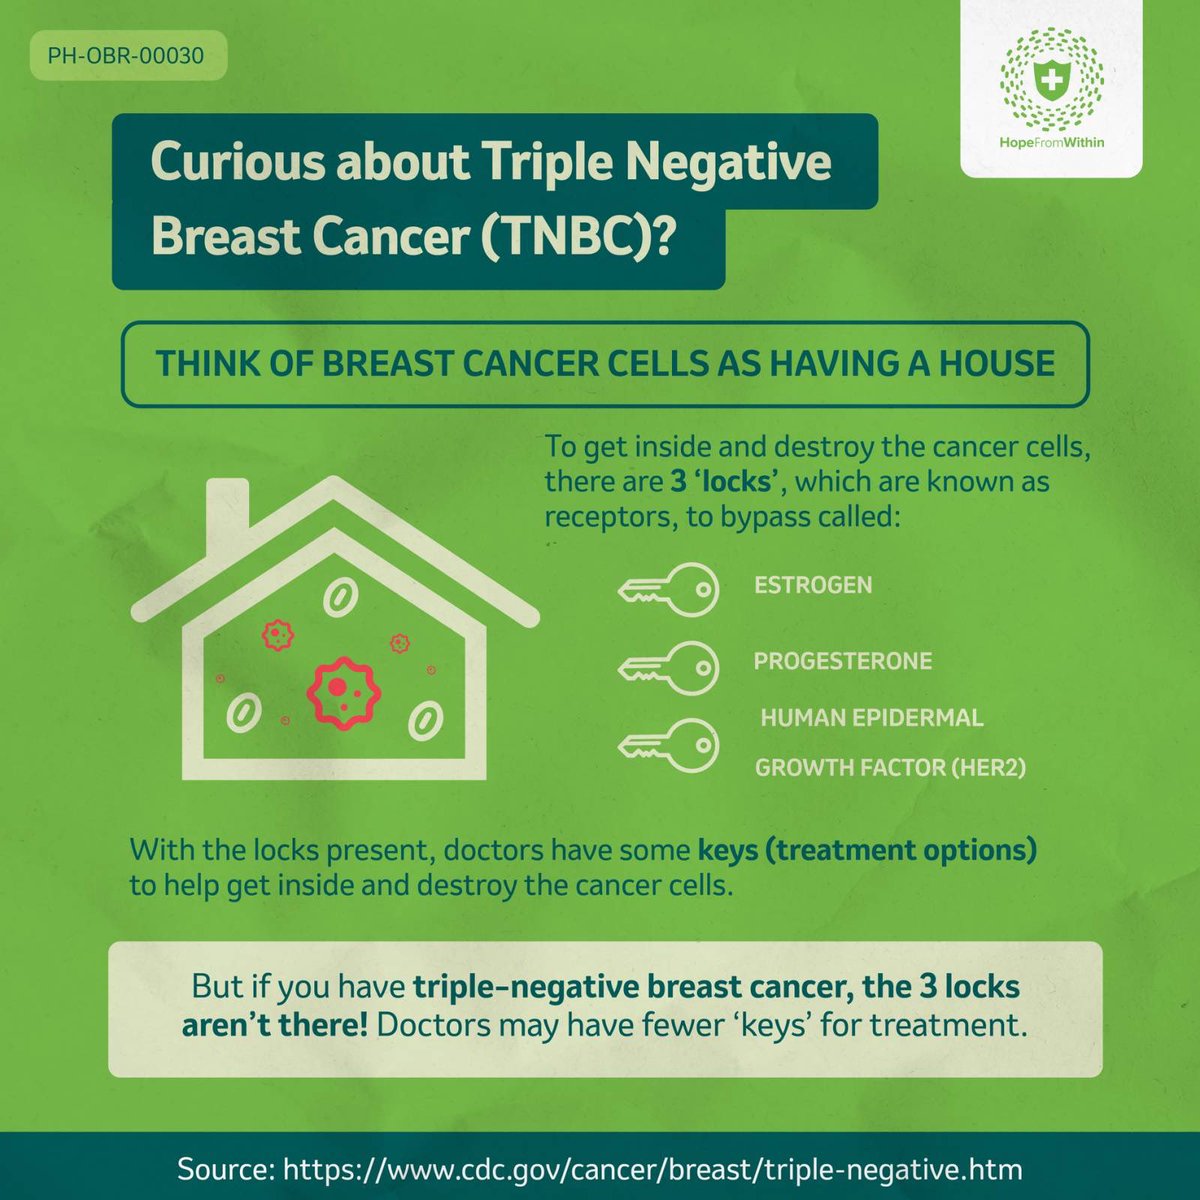 How do you know if your doctor has the ‘keys’ necessary to help address triple negative breast cancer?

Consultation is vital! Ask your doctor today about panel testing to reveal if your breast cancer condition is TNBC.